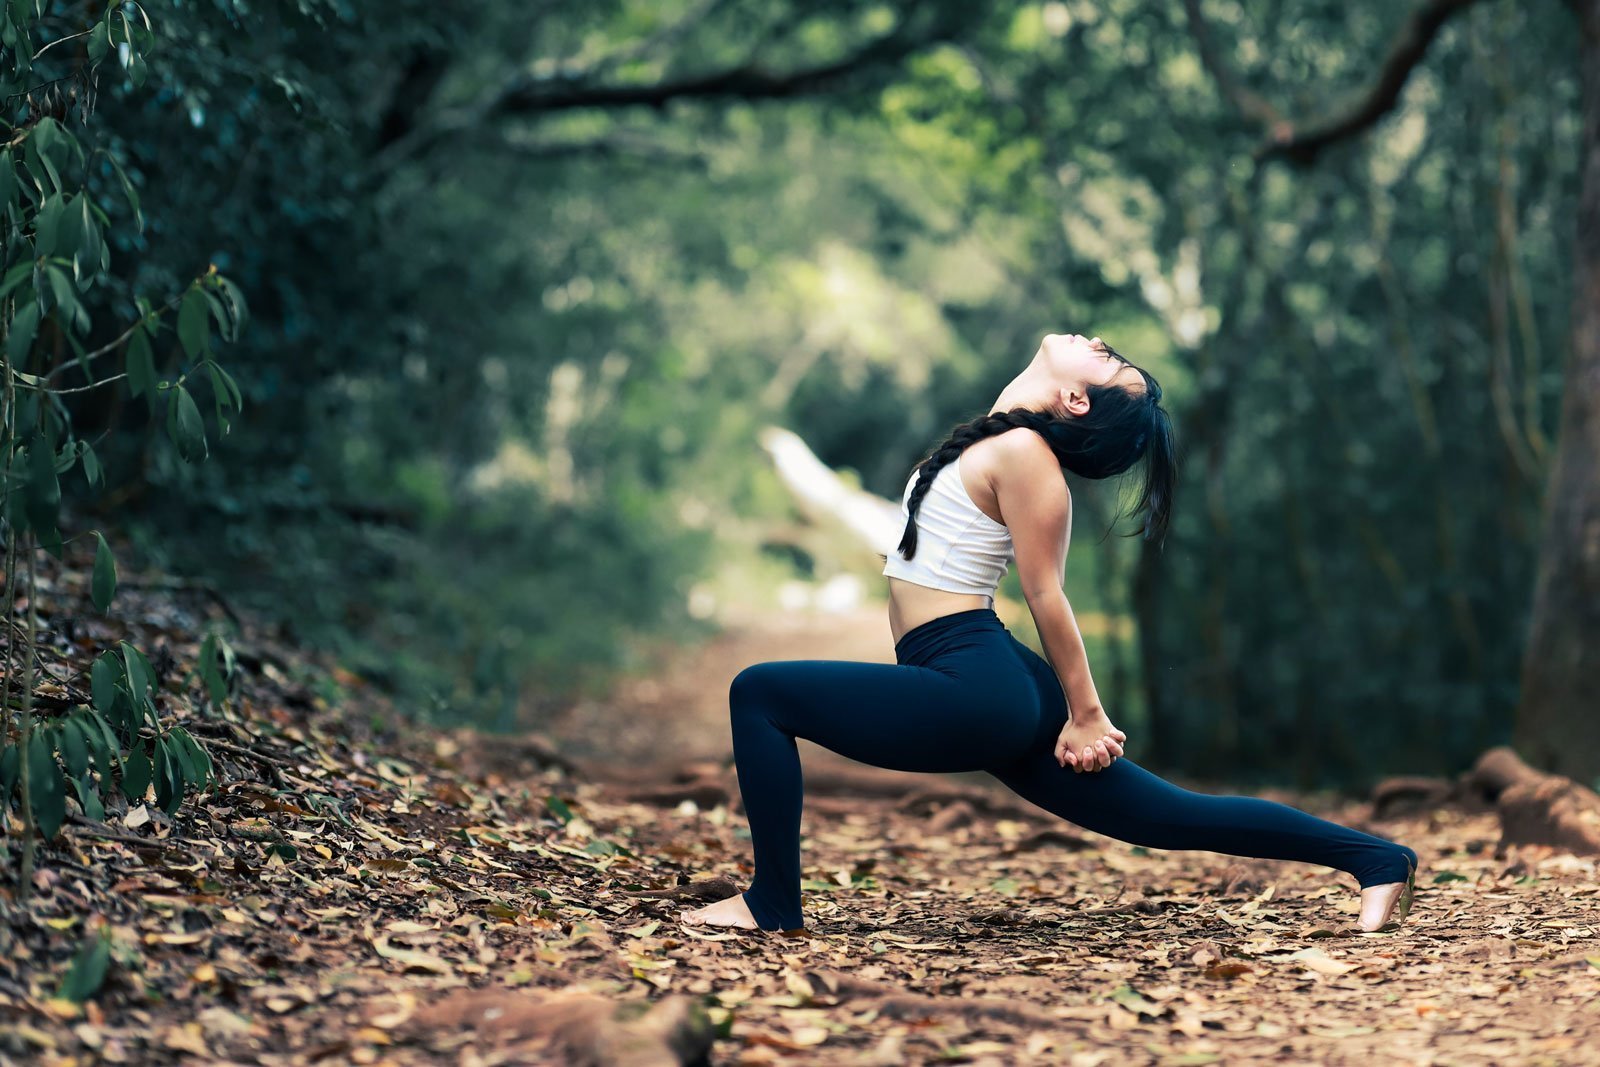 A woman practices yoga in a leaf covered forest. This could represent the power of somatic therapy in Pasadena, CA. For more information on how somatic experiencing therapy can help, contact a somatic therapist today 91101 | 90026 | 90042 | 90065